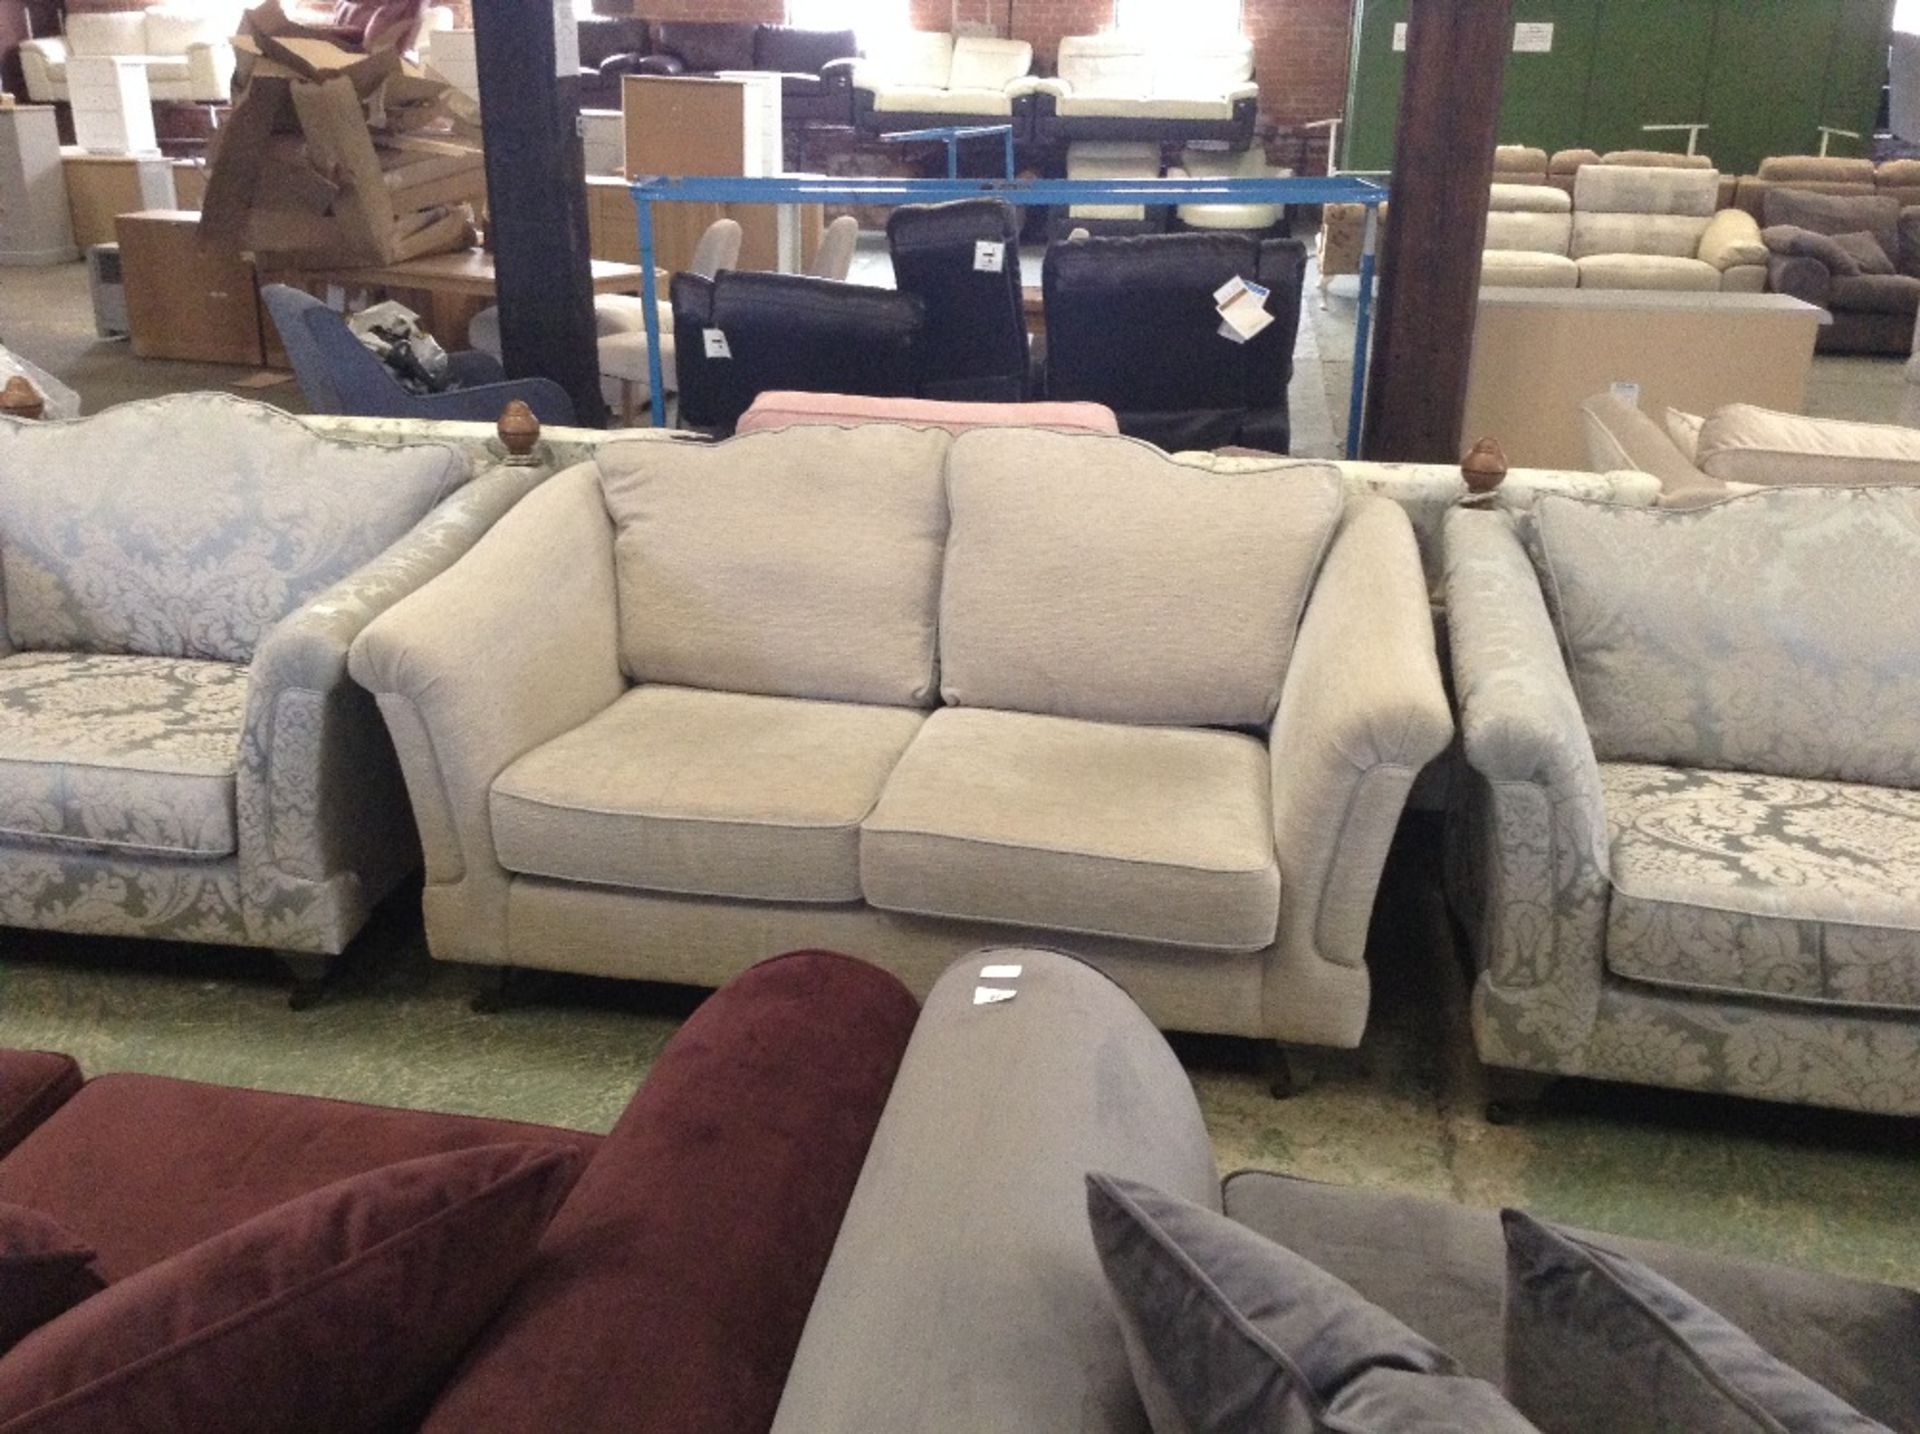 LIGHT BLUE AND NATURAL FLORAL PATTERNED SPLIT 4 SEATER SOFA, 3 SEATER SOFA, SNUG CHAIR, FOOTSTOOL AN - Image 3 of 4